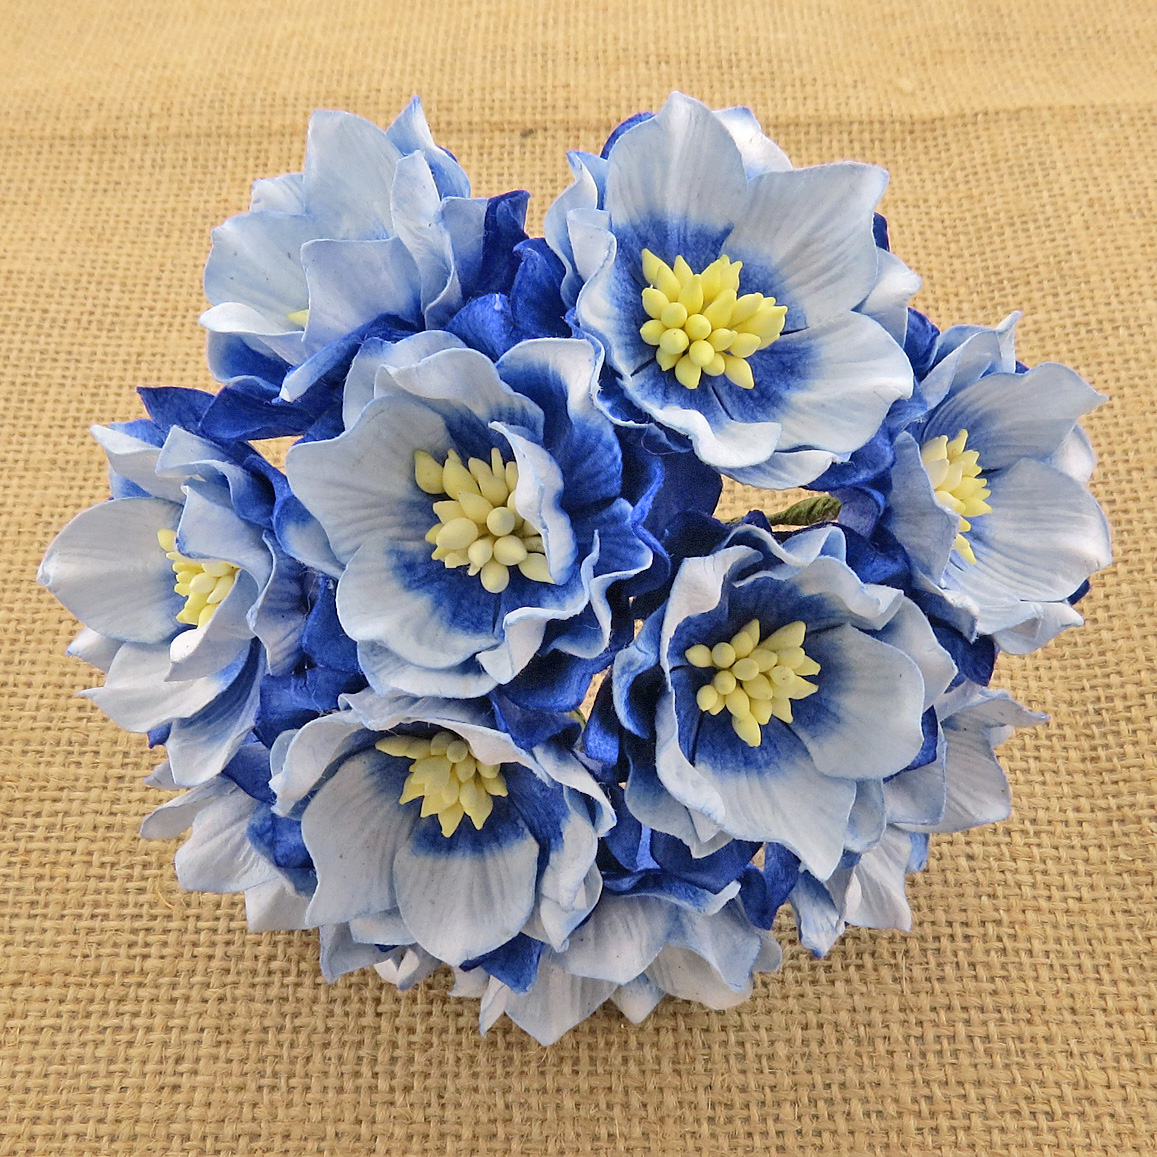 25 2-TONE SAPPHIRE BLUE MULBERRY PAPER LOTUS FLOWERS